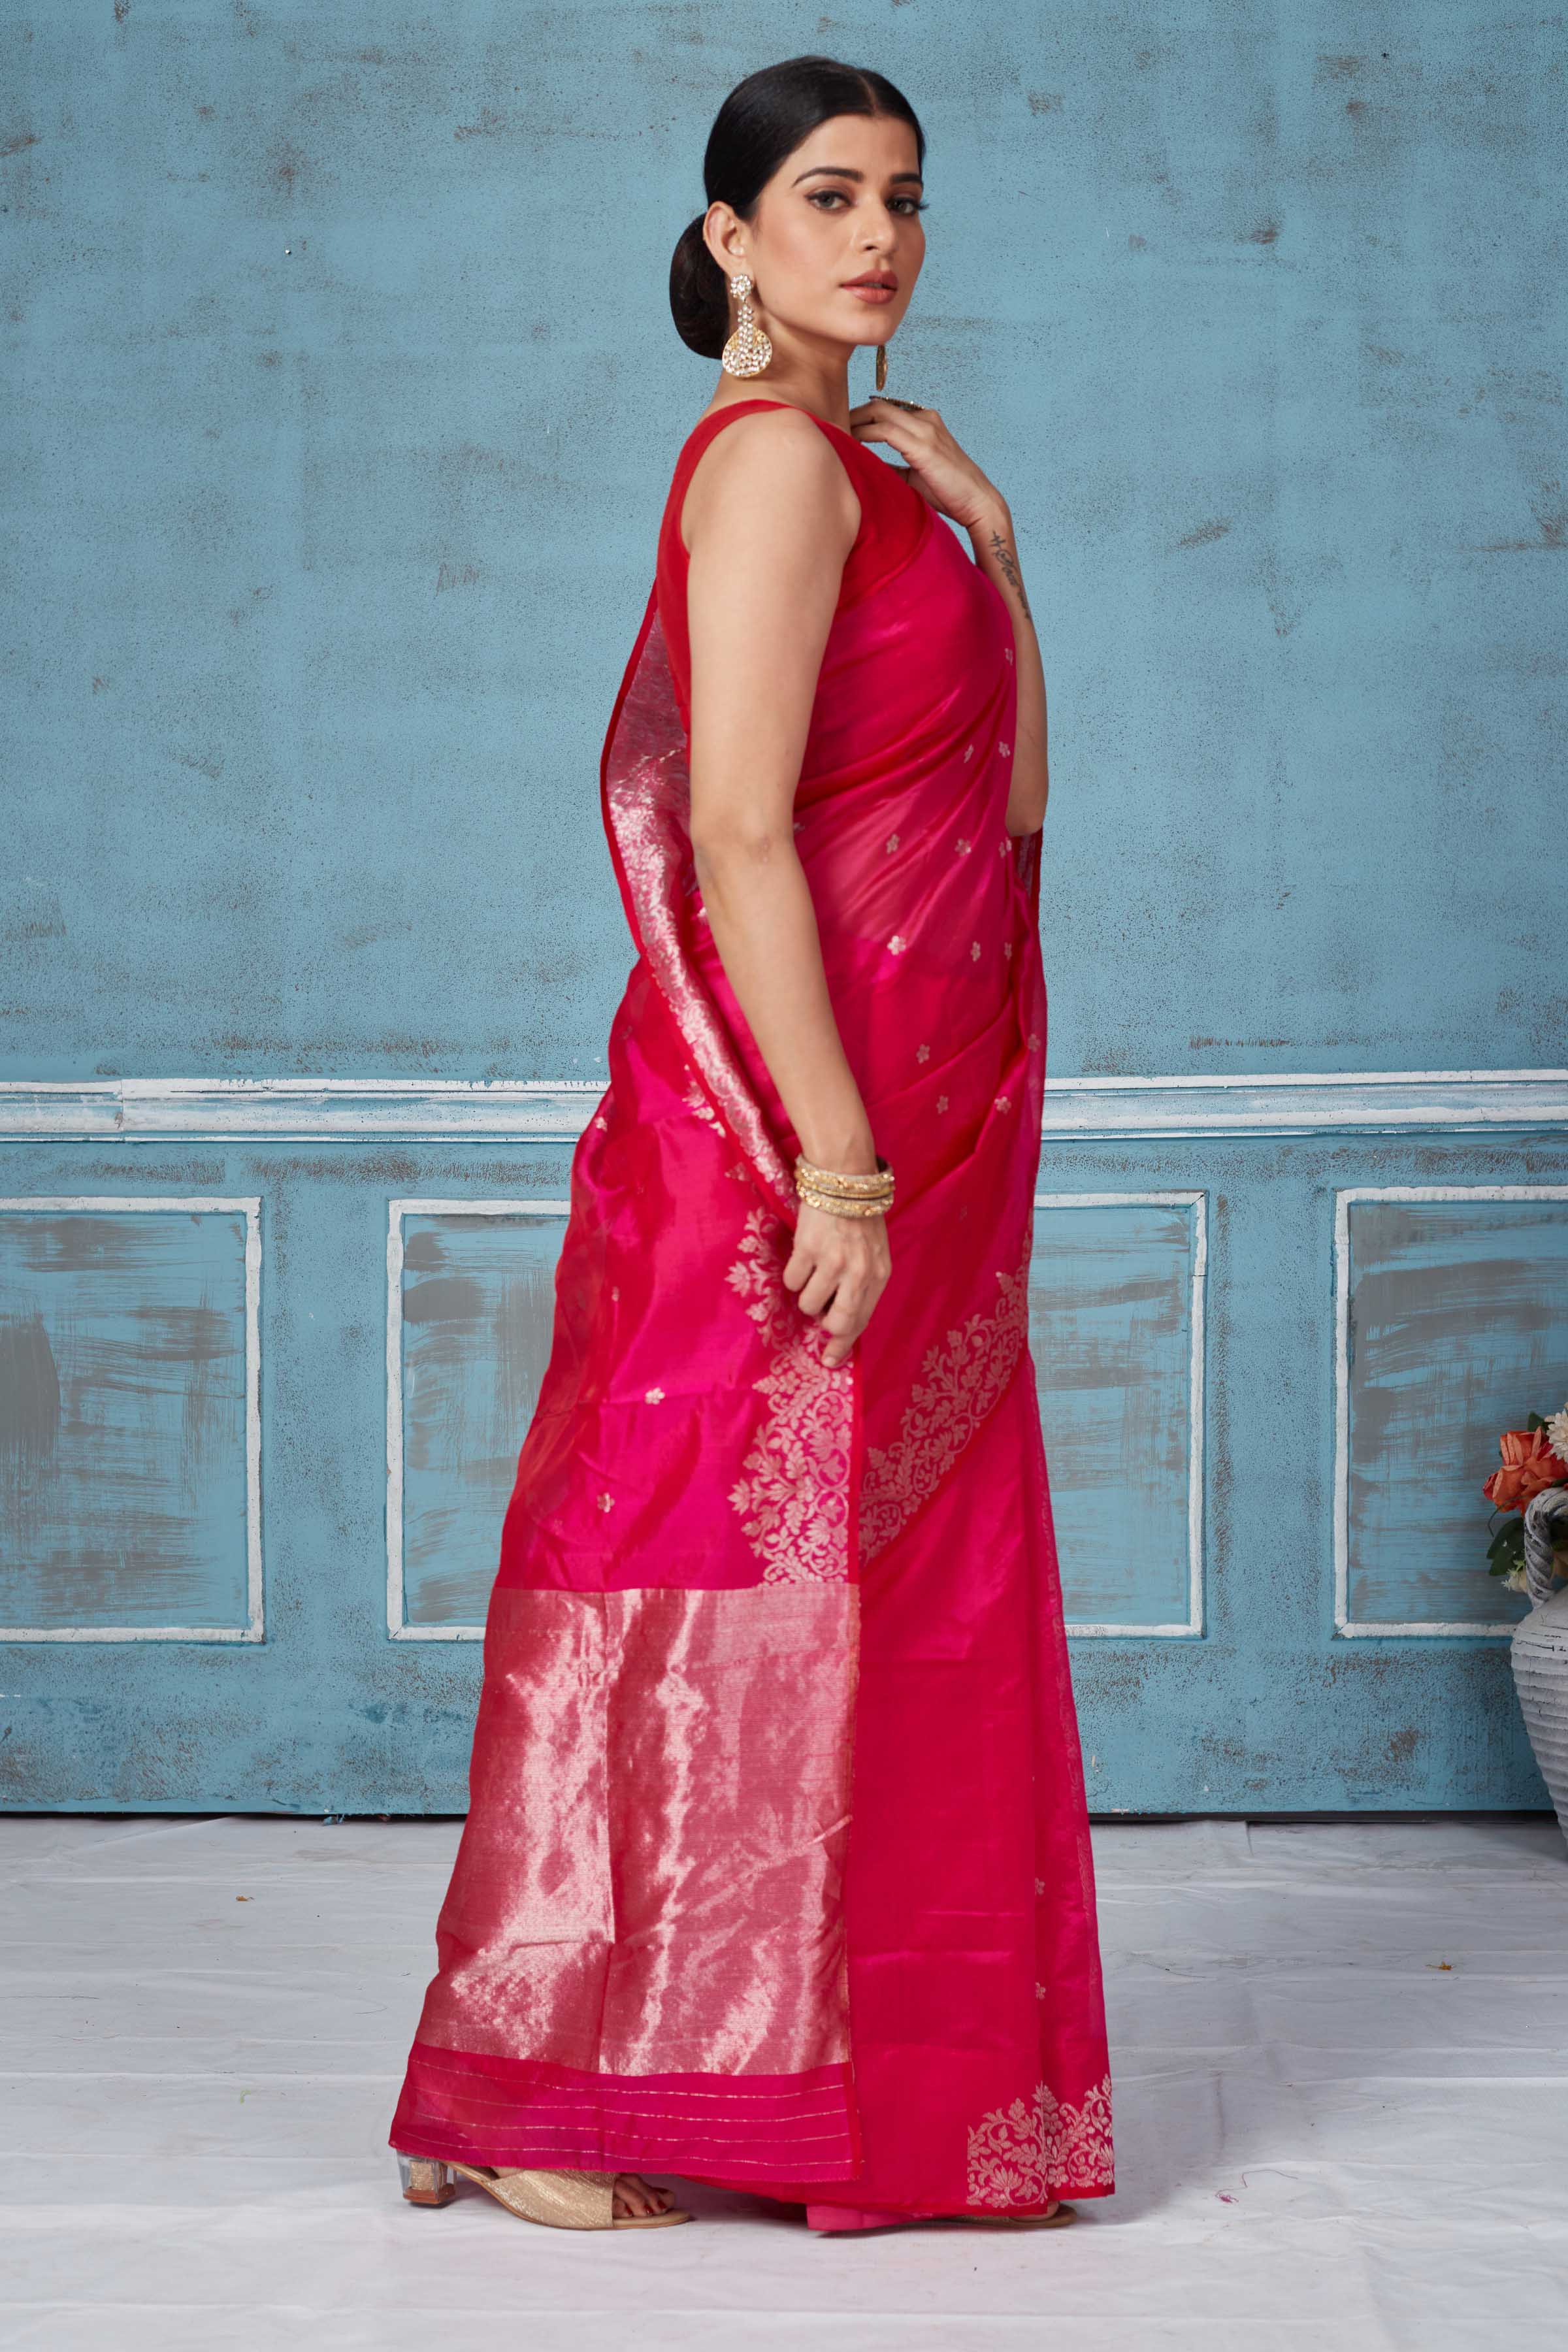 Buy pink Pattu silk saree online in USA with hand woven border. Look your best on festive occasions in latest designer saris, pure silk saris, Kanchipuram silk sarees, handwoven sarees, tussar silk sarees, embroidered sarees from Pure Elegance Indian fashion store in USA.-side